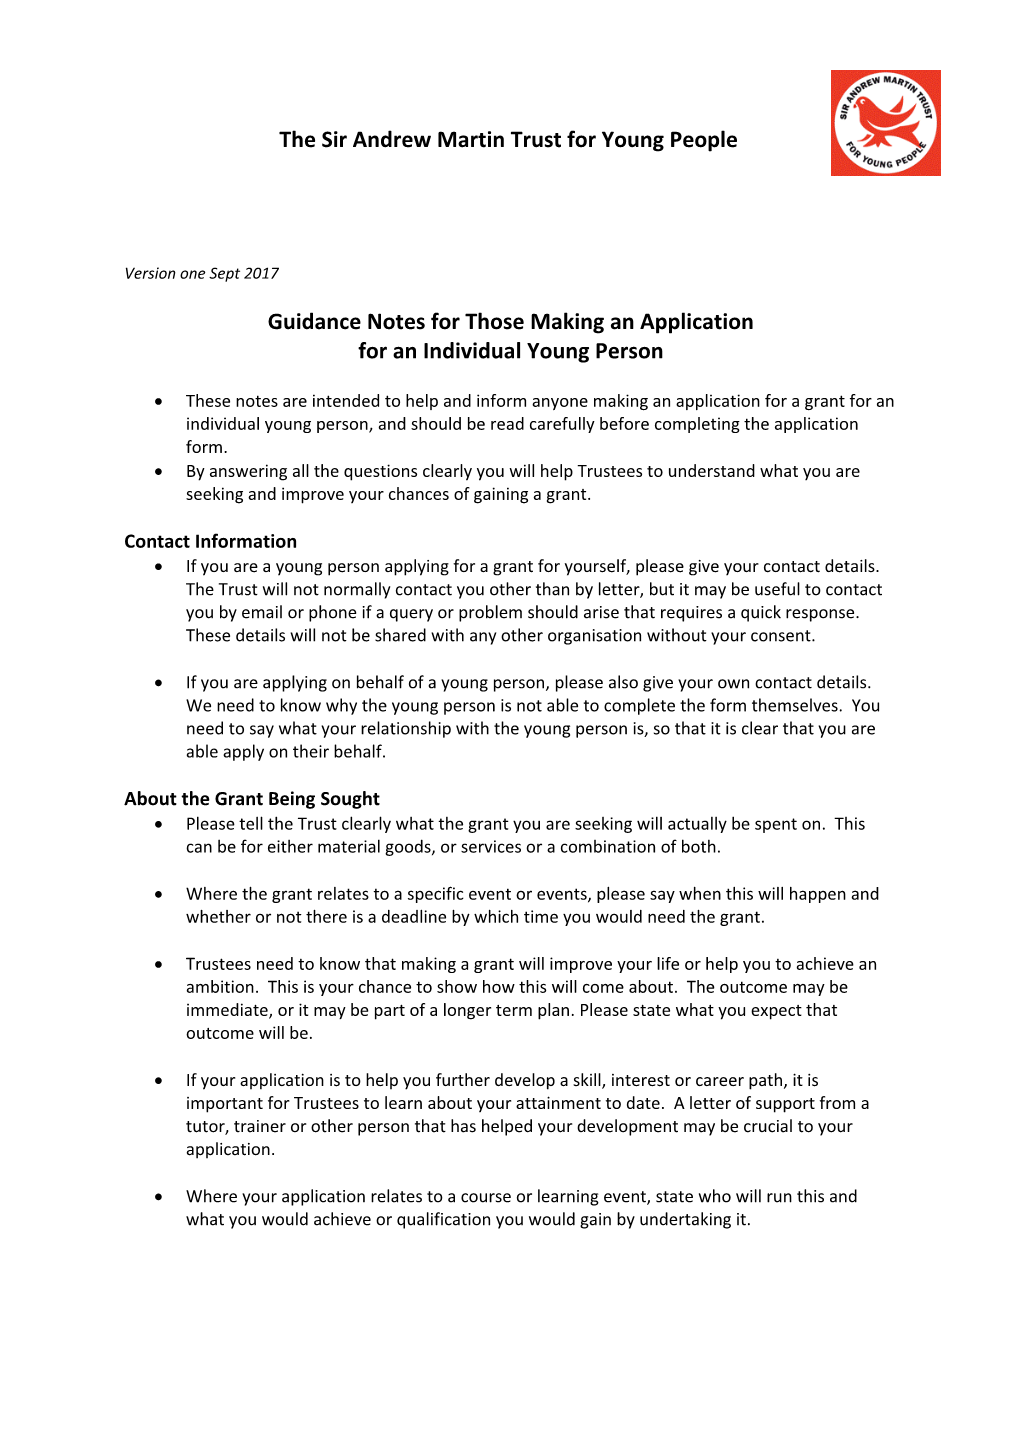 Guidance Notes for Those Making an Application